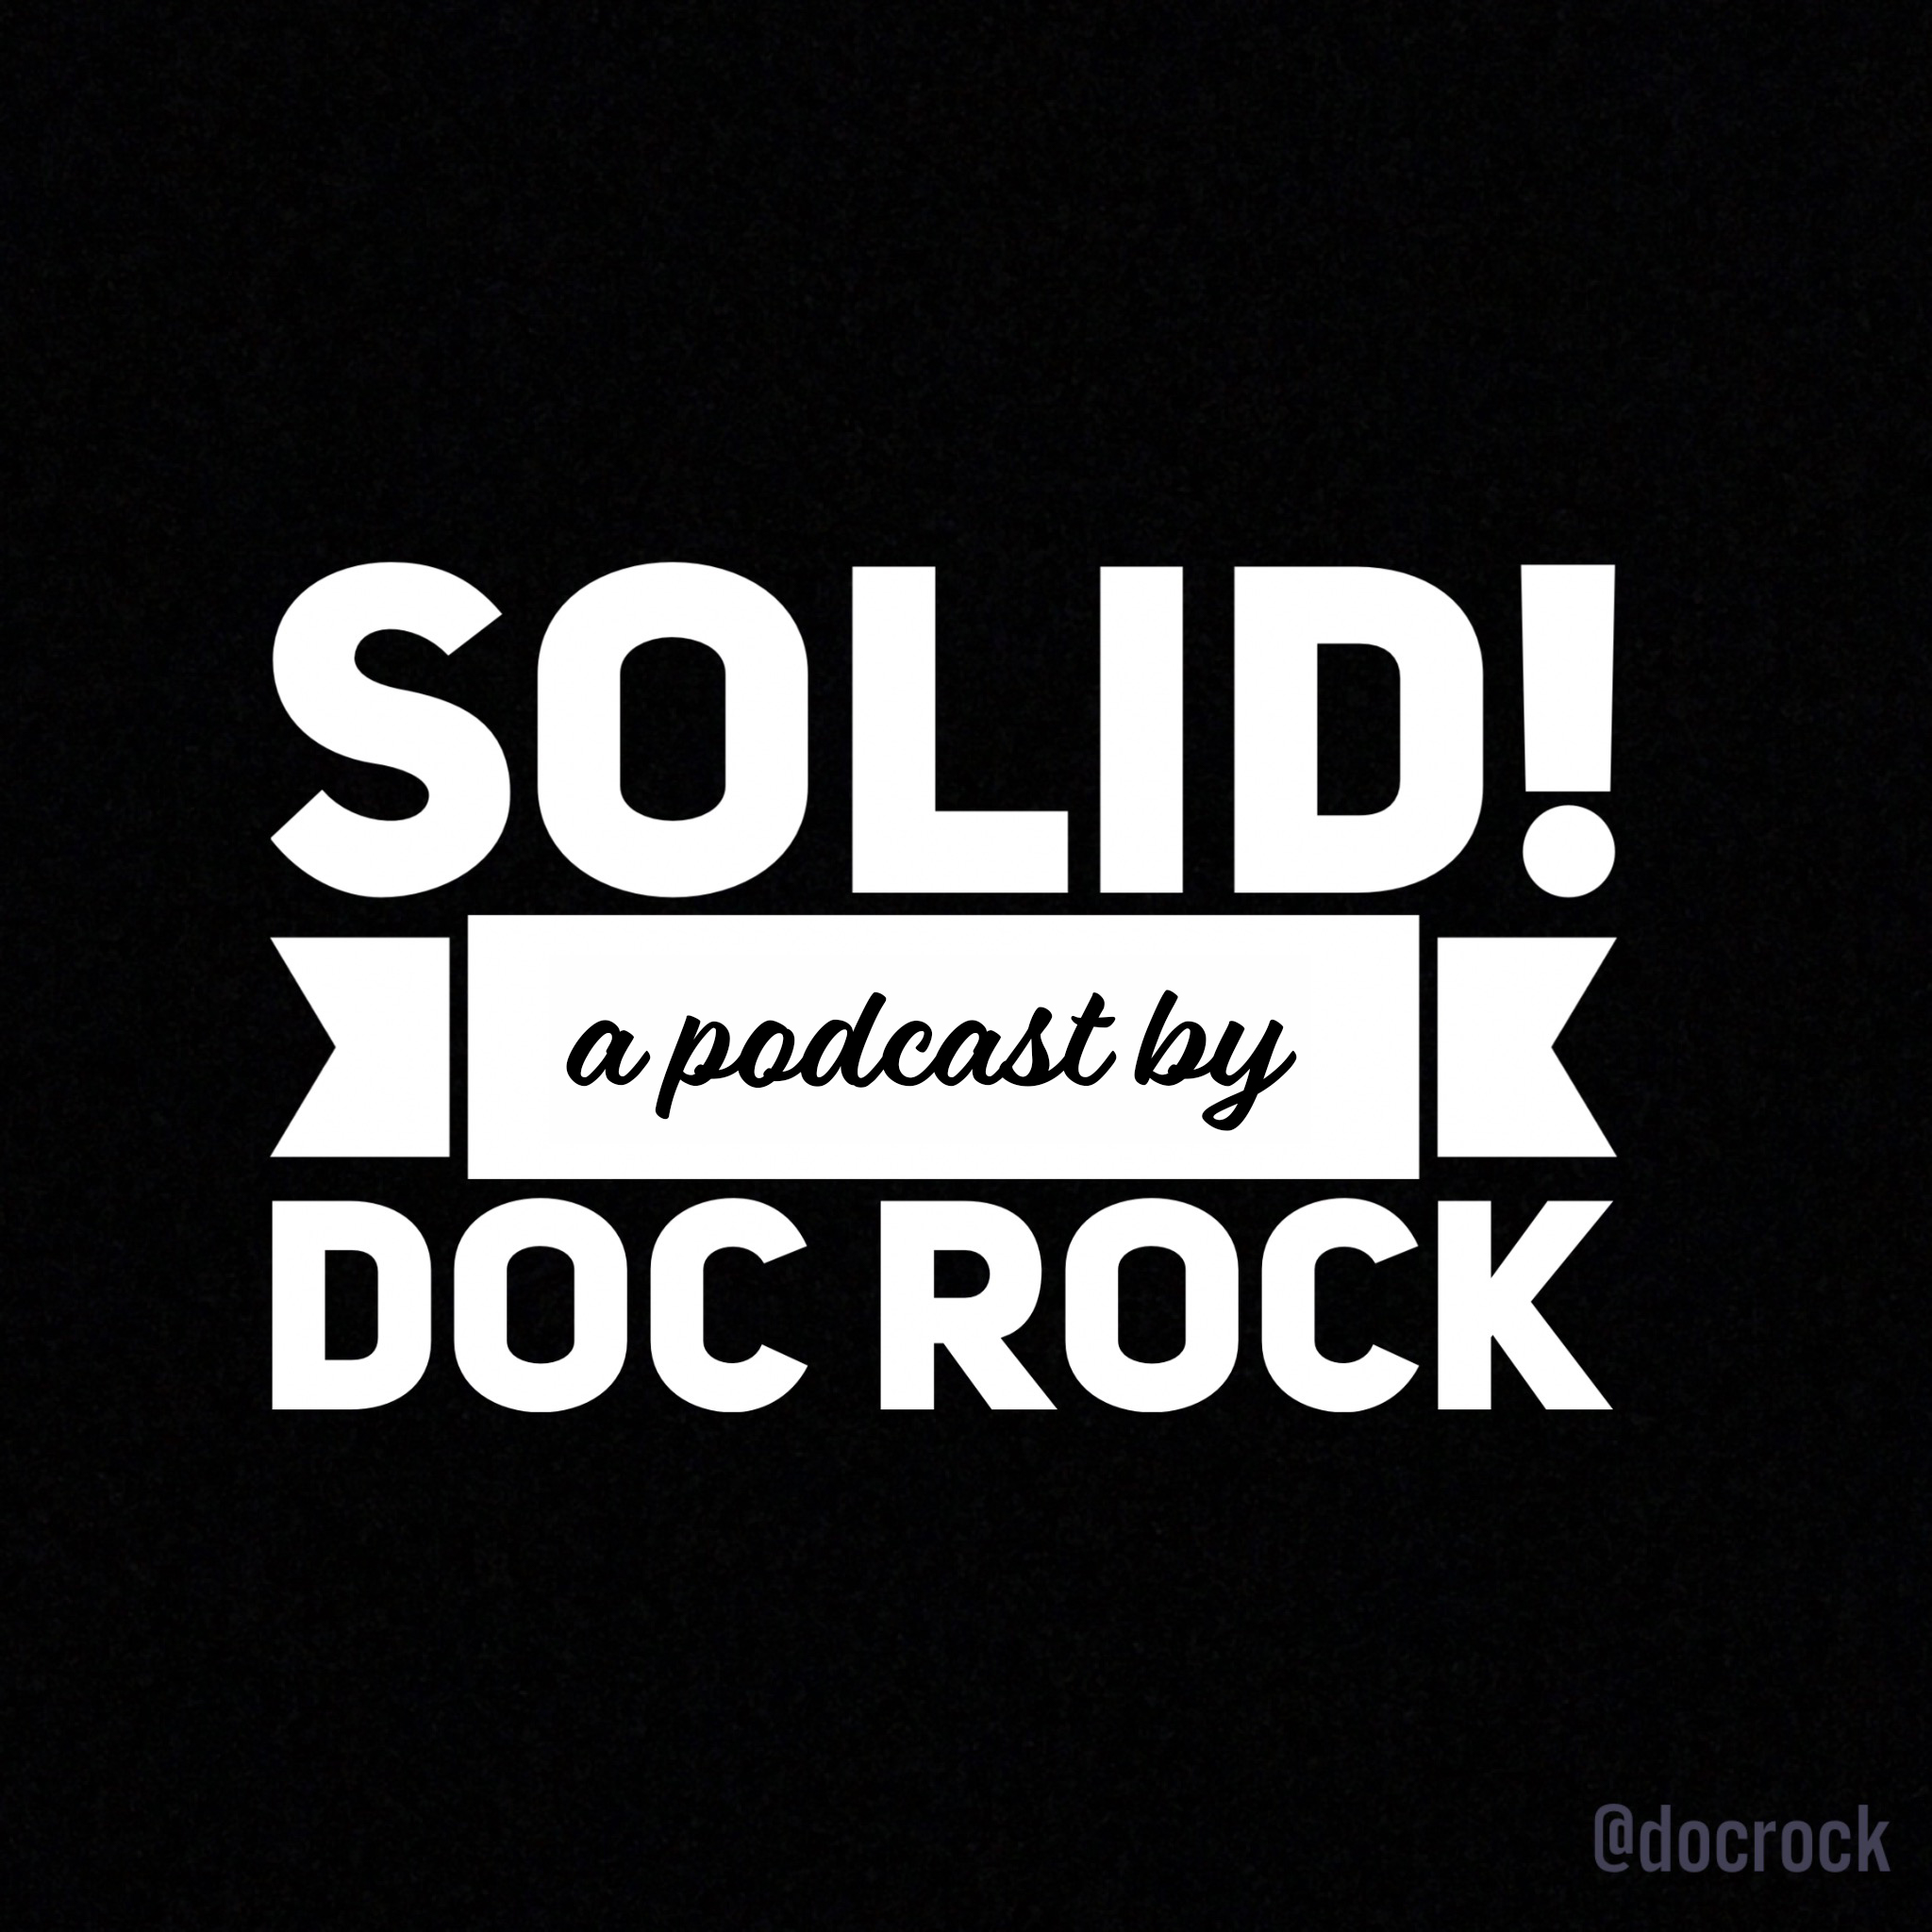 Welcome to the Solid Podcast hosted by Doc Rock